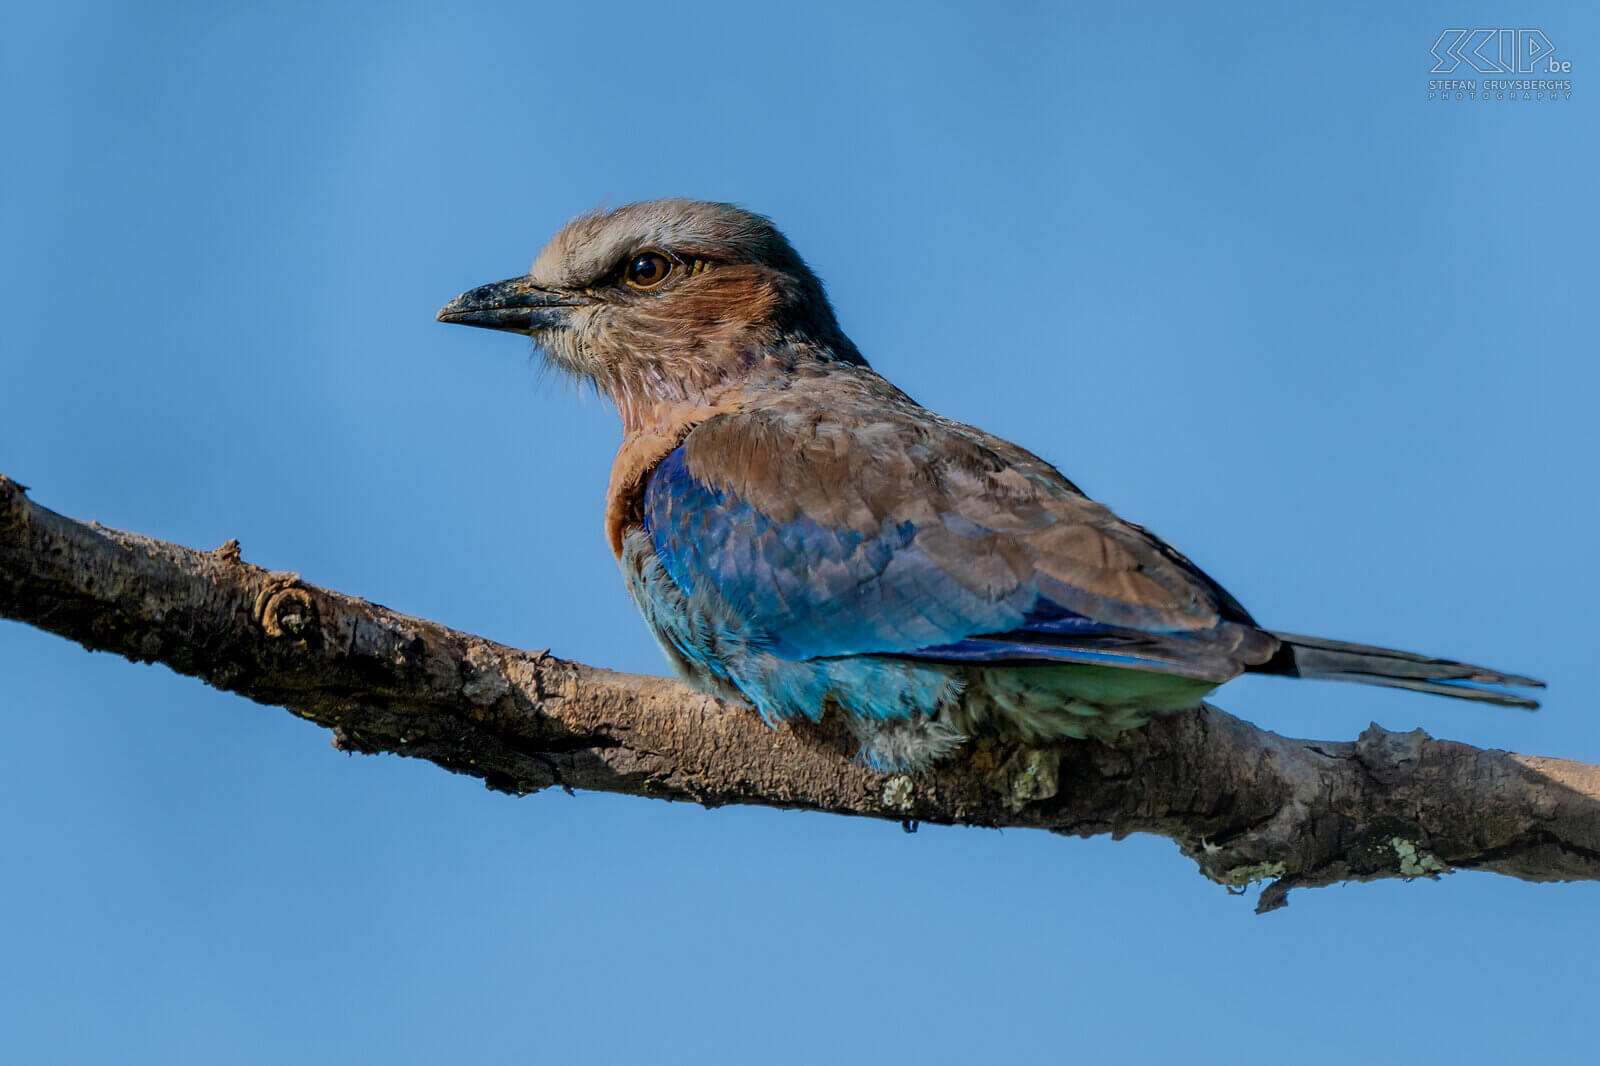 Solio - Abyssinian roller The Lilac-breasted roller is the most common roller in Kenya. But in Solio we could also spot the Abyssinian Roller (Coracias abyssinicus). This bird has even longer tail feathers and its breast is completely blue. Stefan Cruysberghs